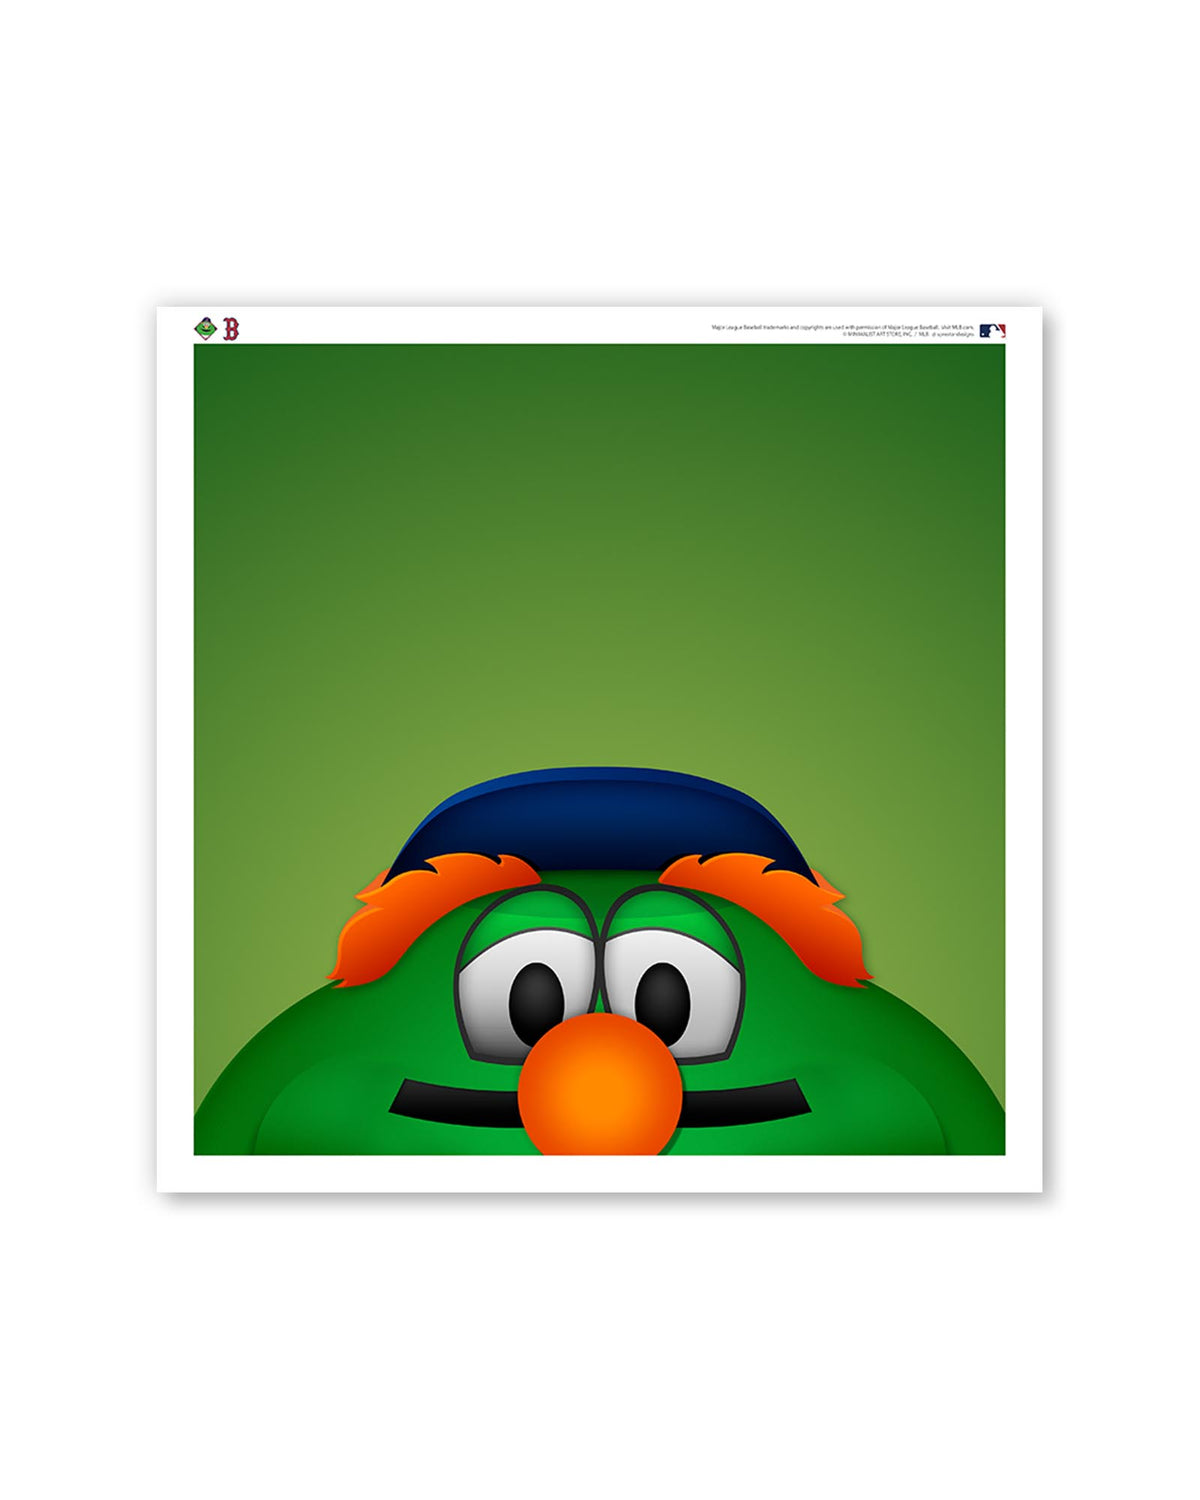 Minimalist Wally The Green Monster Square Poster Print